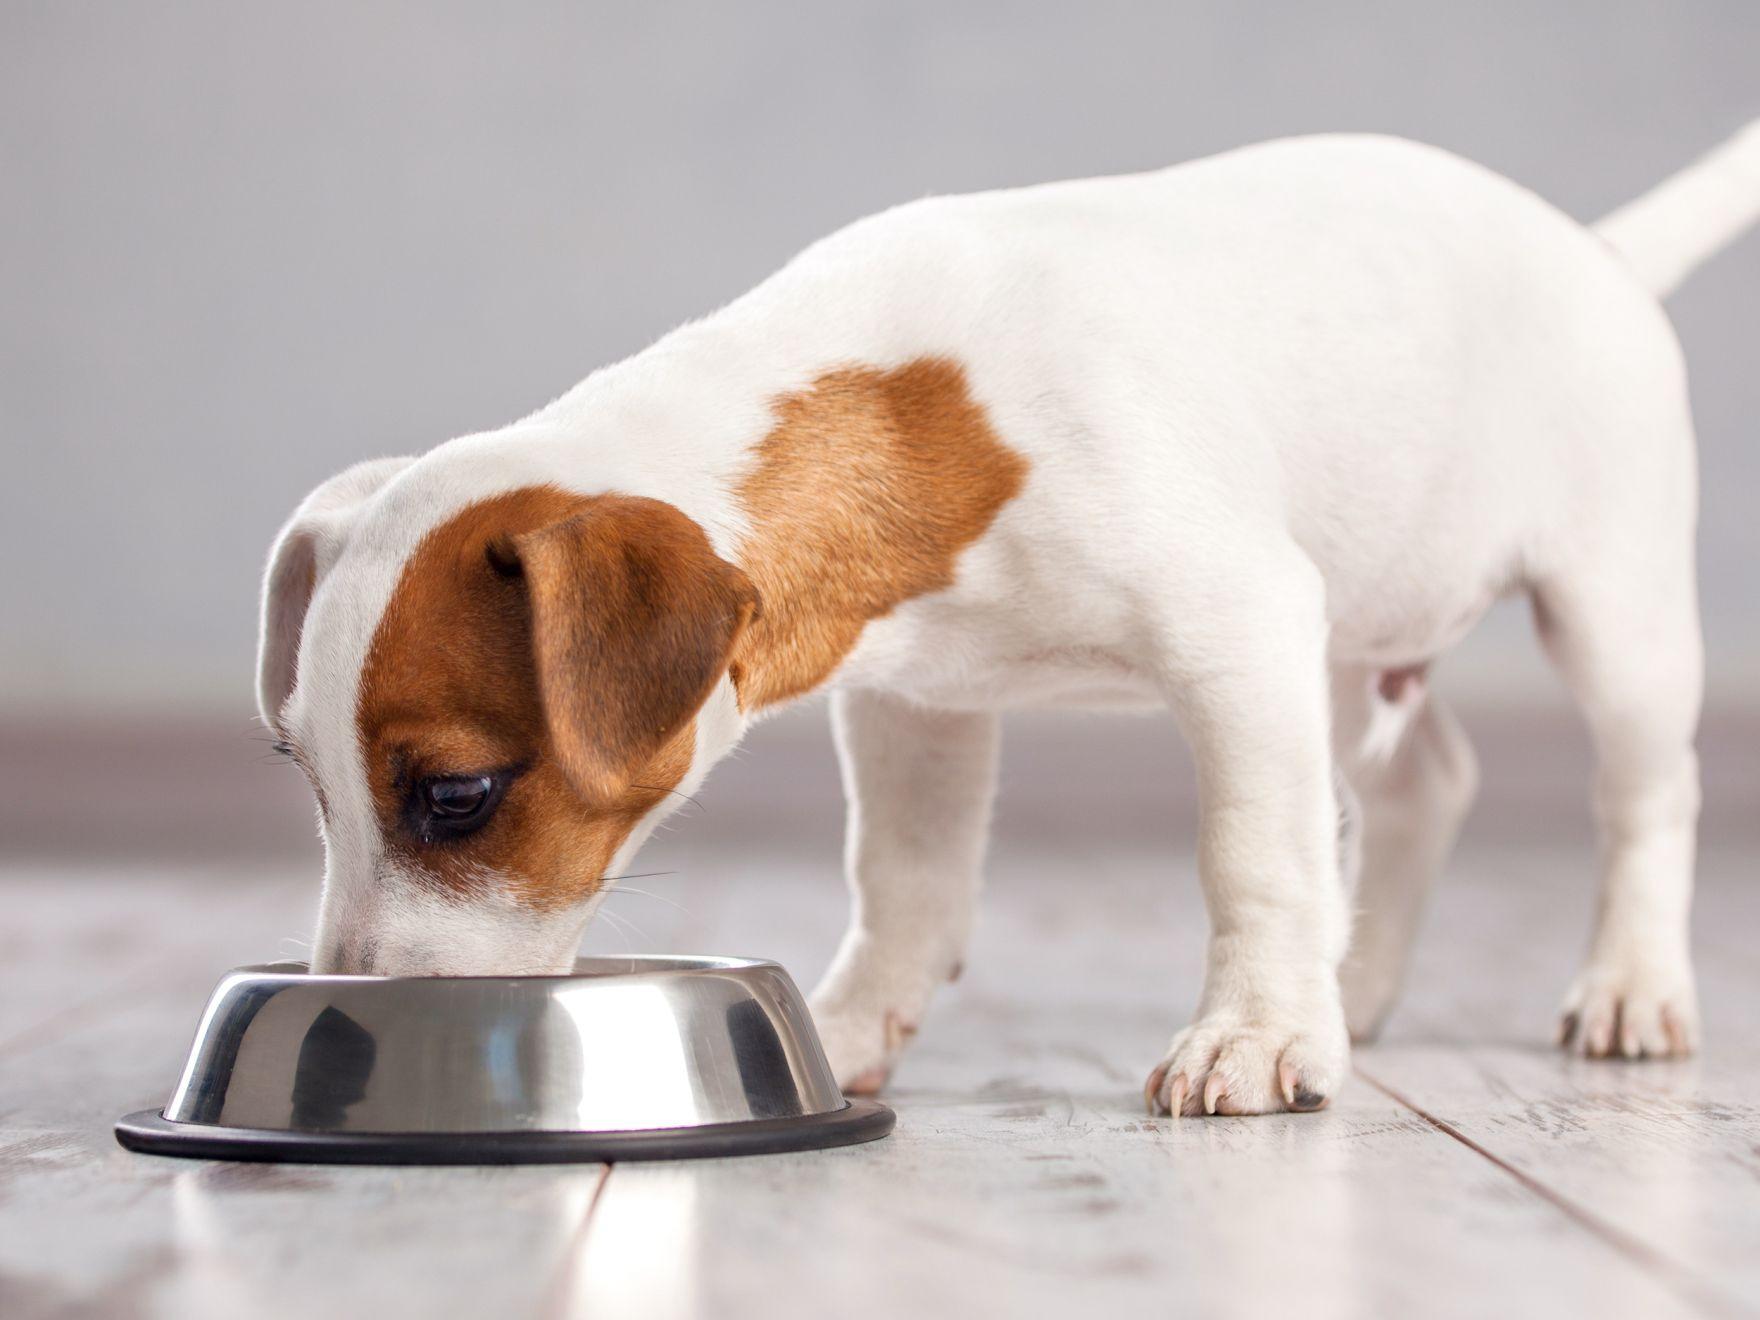 Jack Russell Terrier standing indoors eating from a silver food bowl